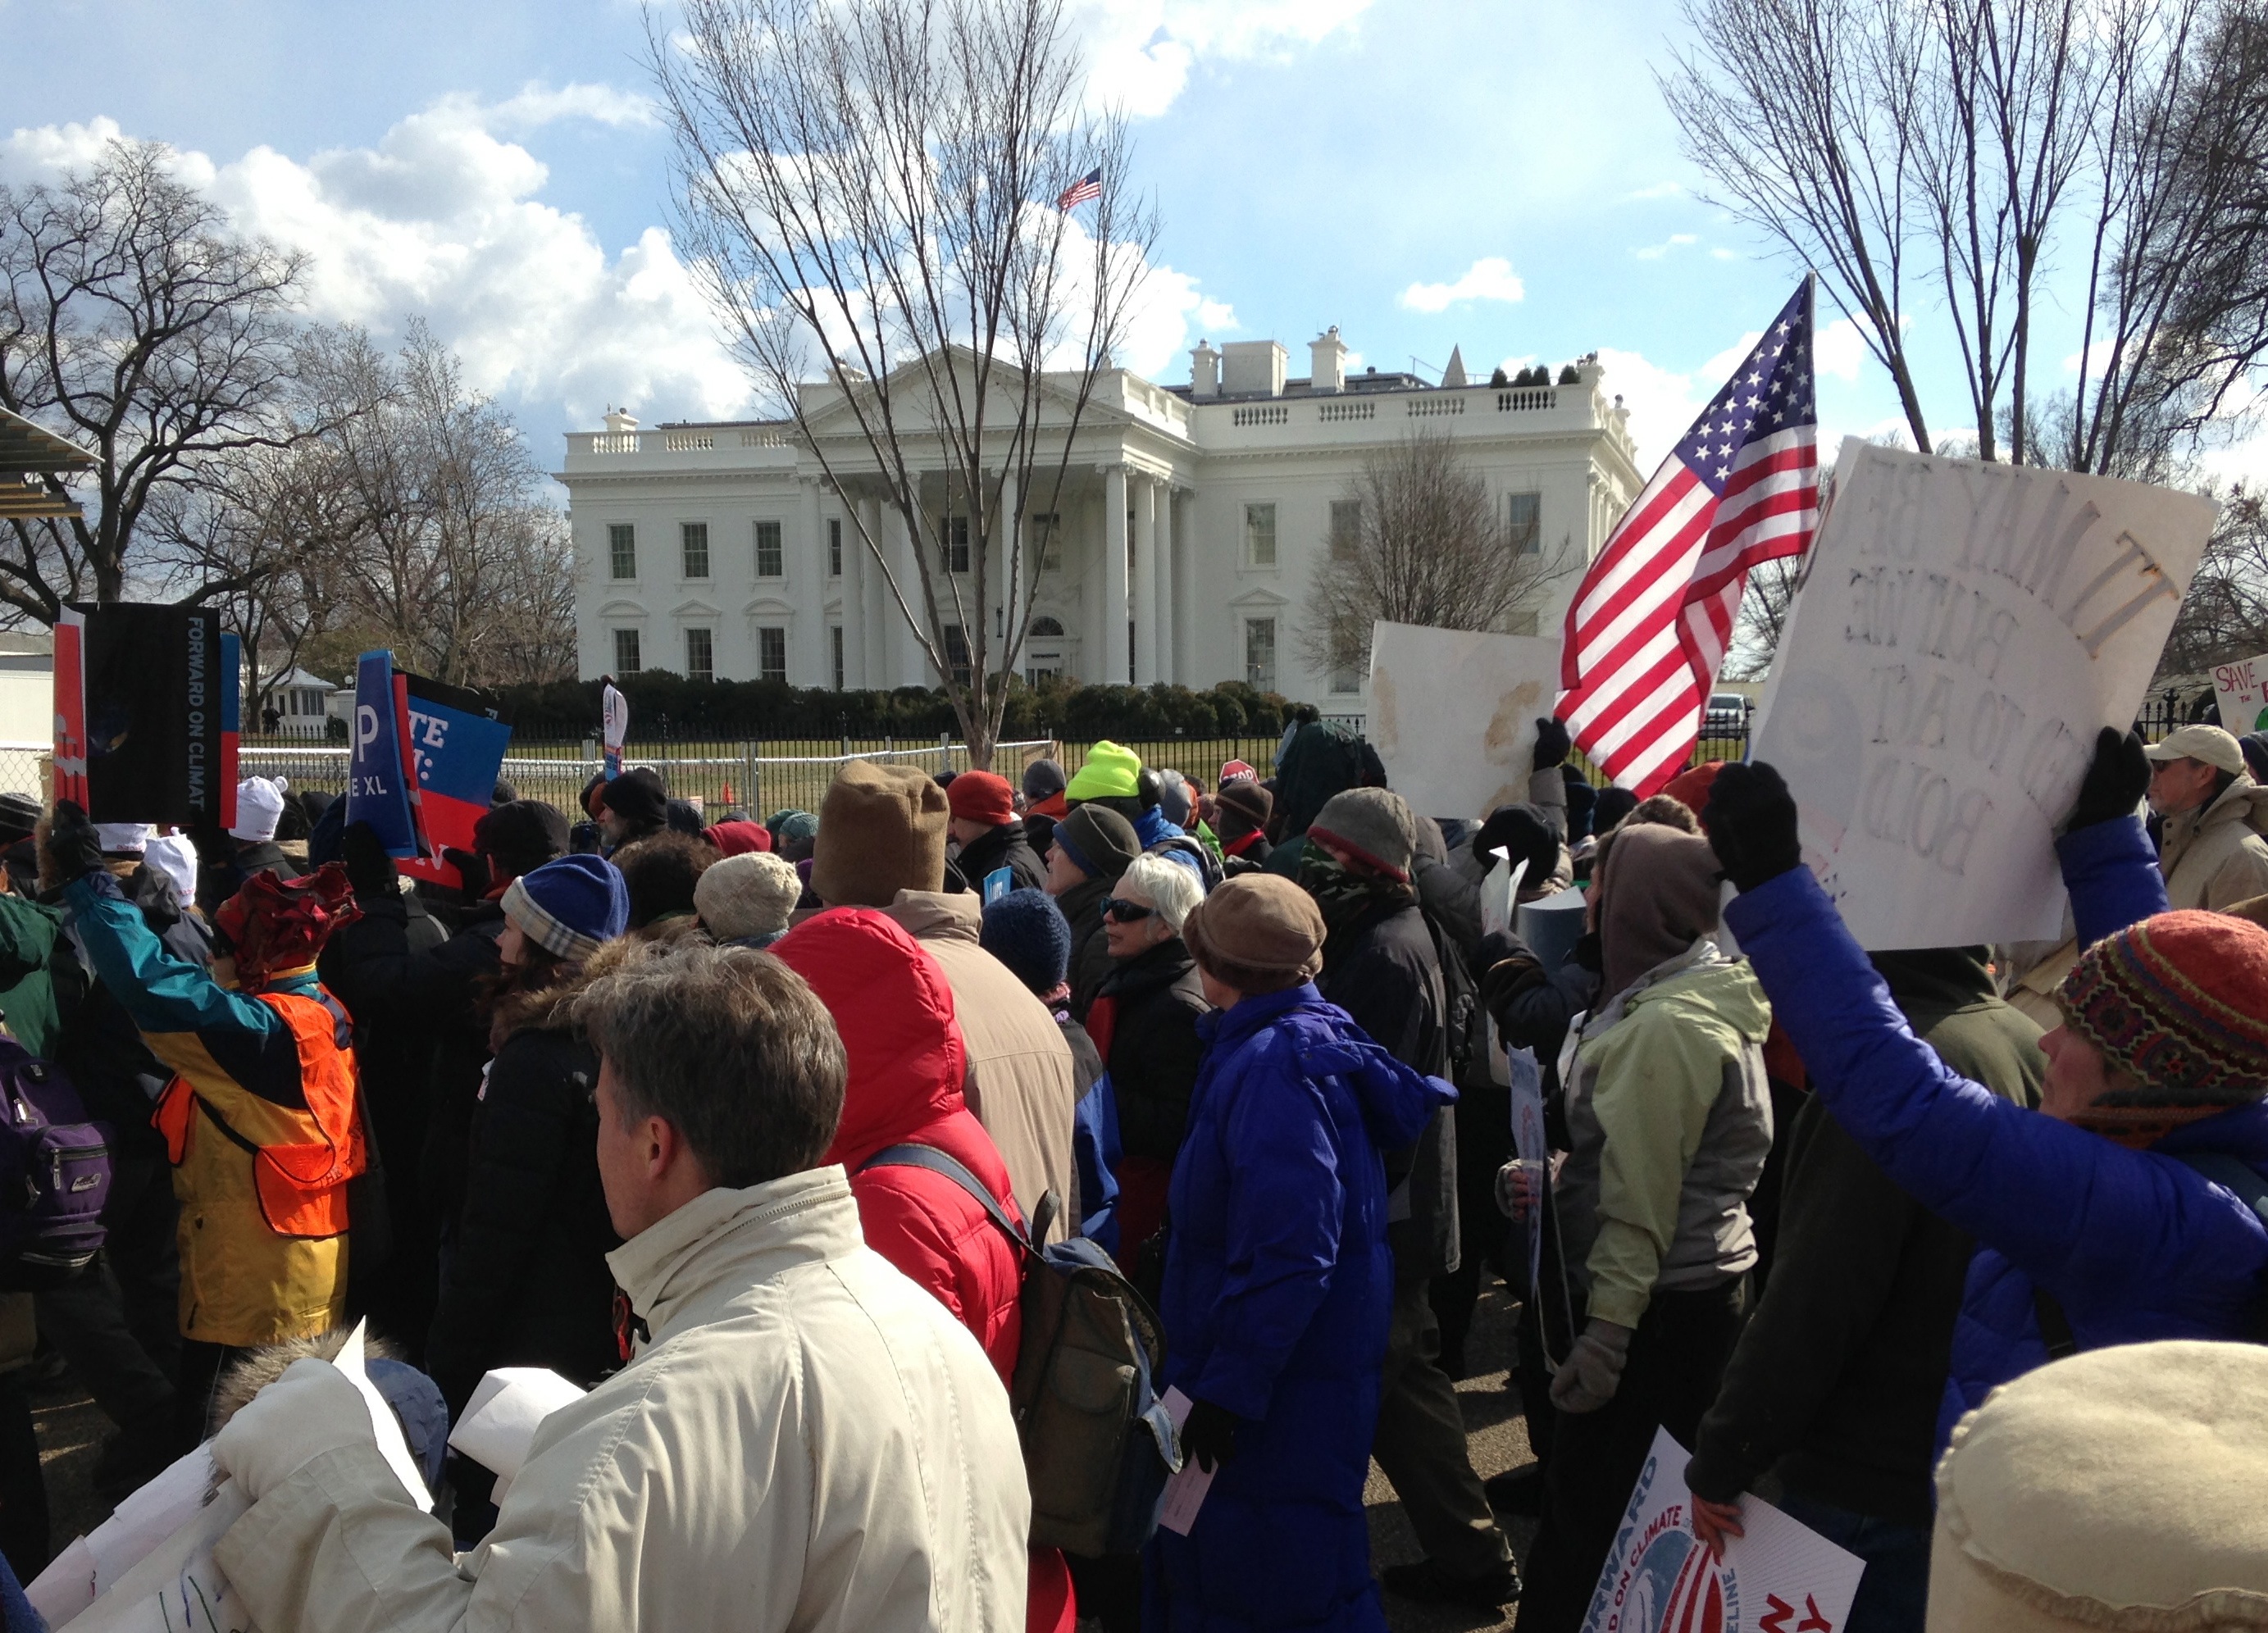 Forward on Climate marchers pass the White House